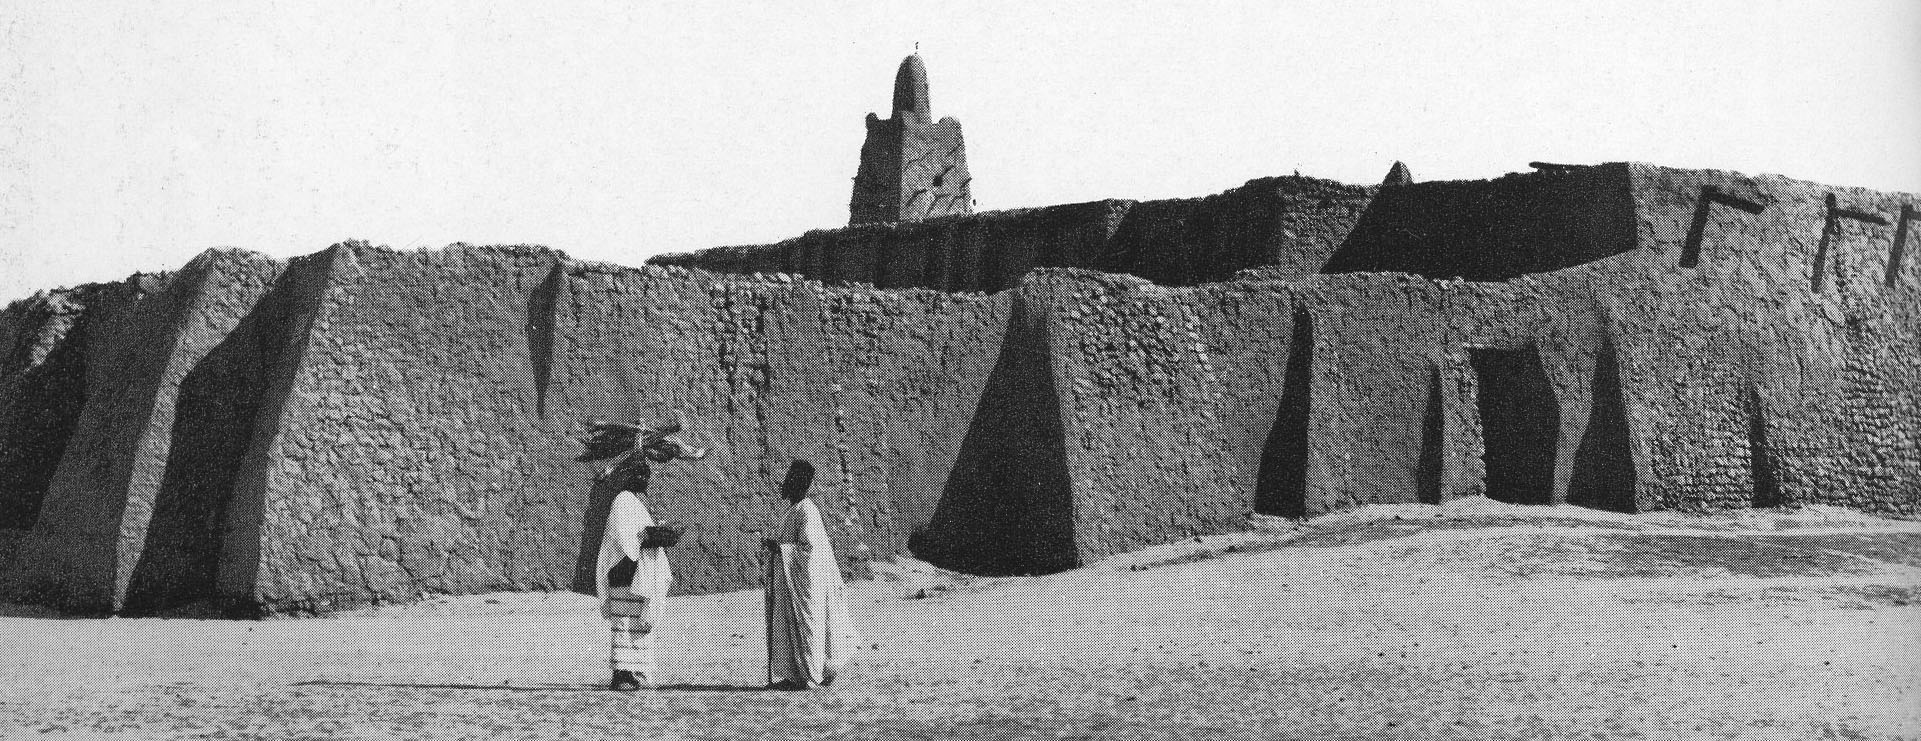 A historical photograph shows Djingarey Ber Mosque in the early 1900s. The Timbuktu mosque is also known as an important and ancient centre of learning. Photo: Courtesy of the Aga Khan Trust for Culture